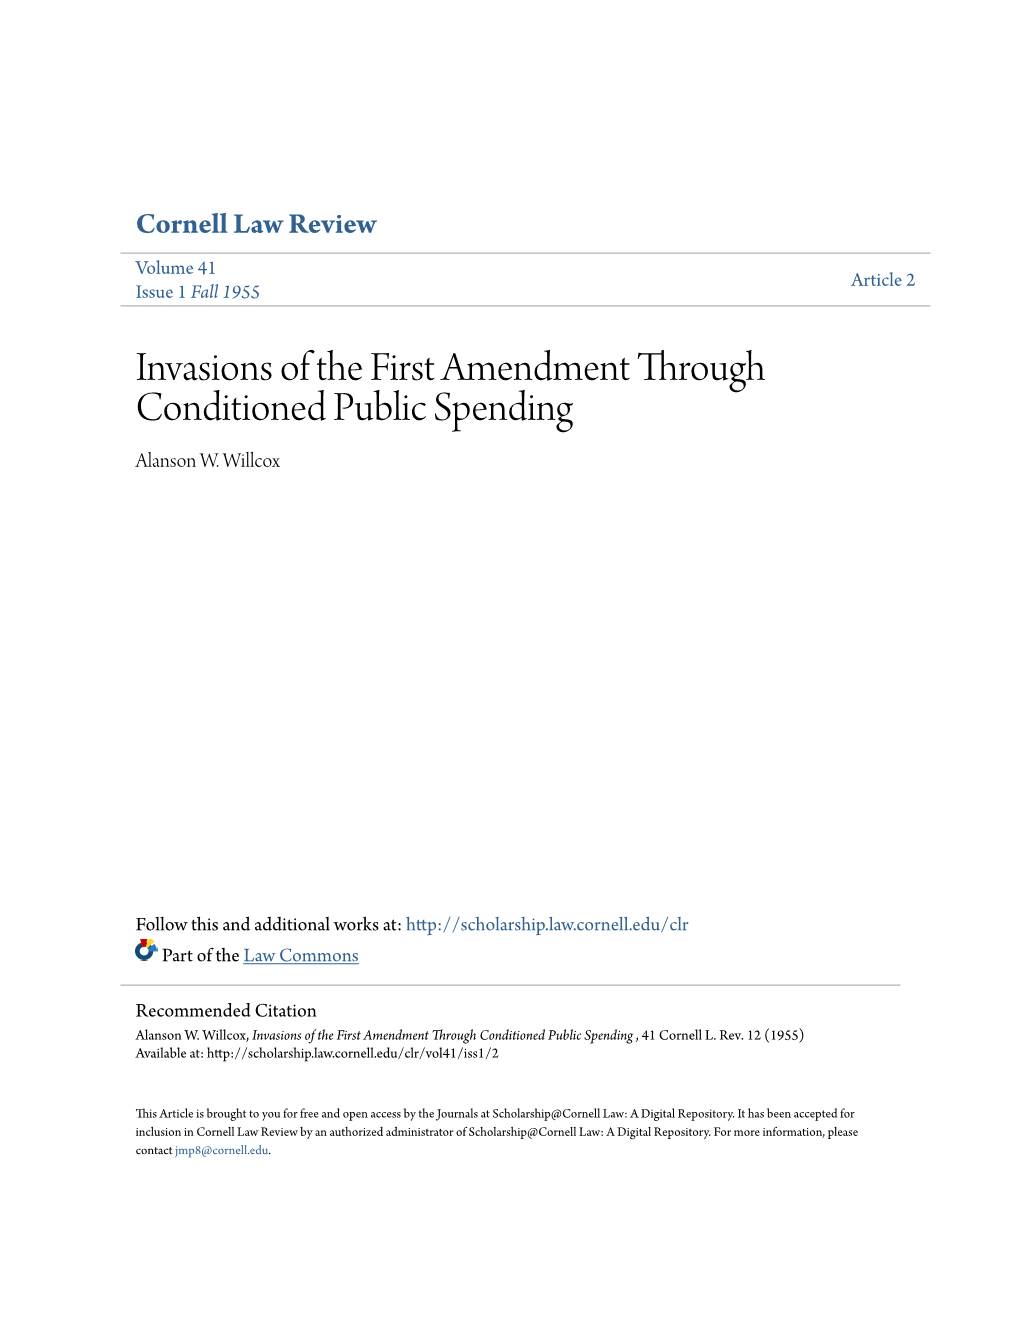 Invasions of the First Amendment Through Conditioned Public Spending Alanson W